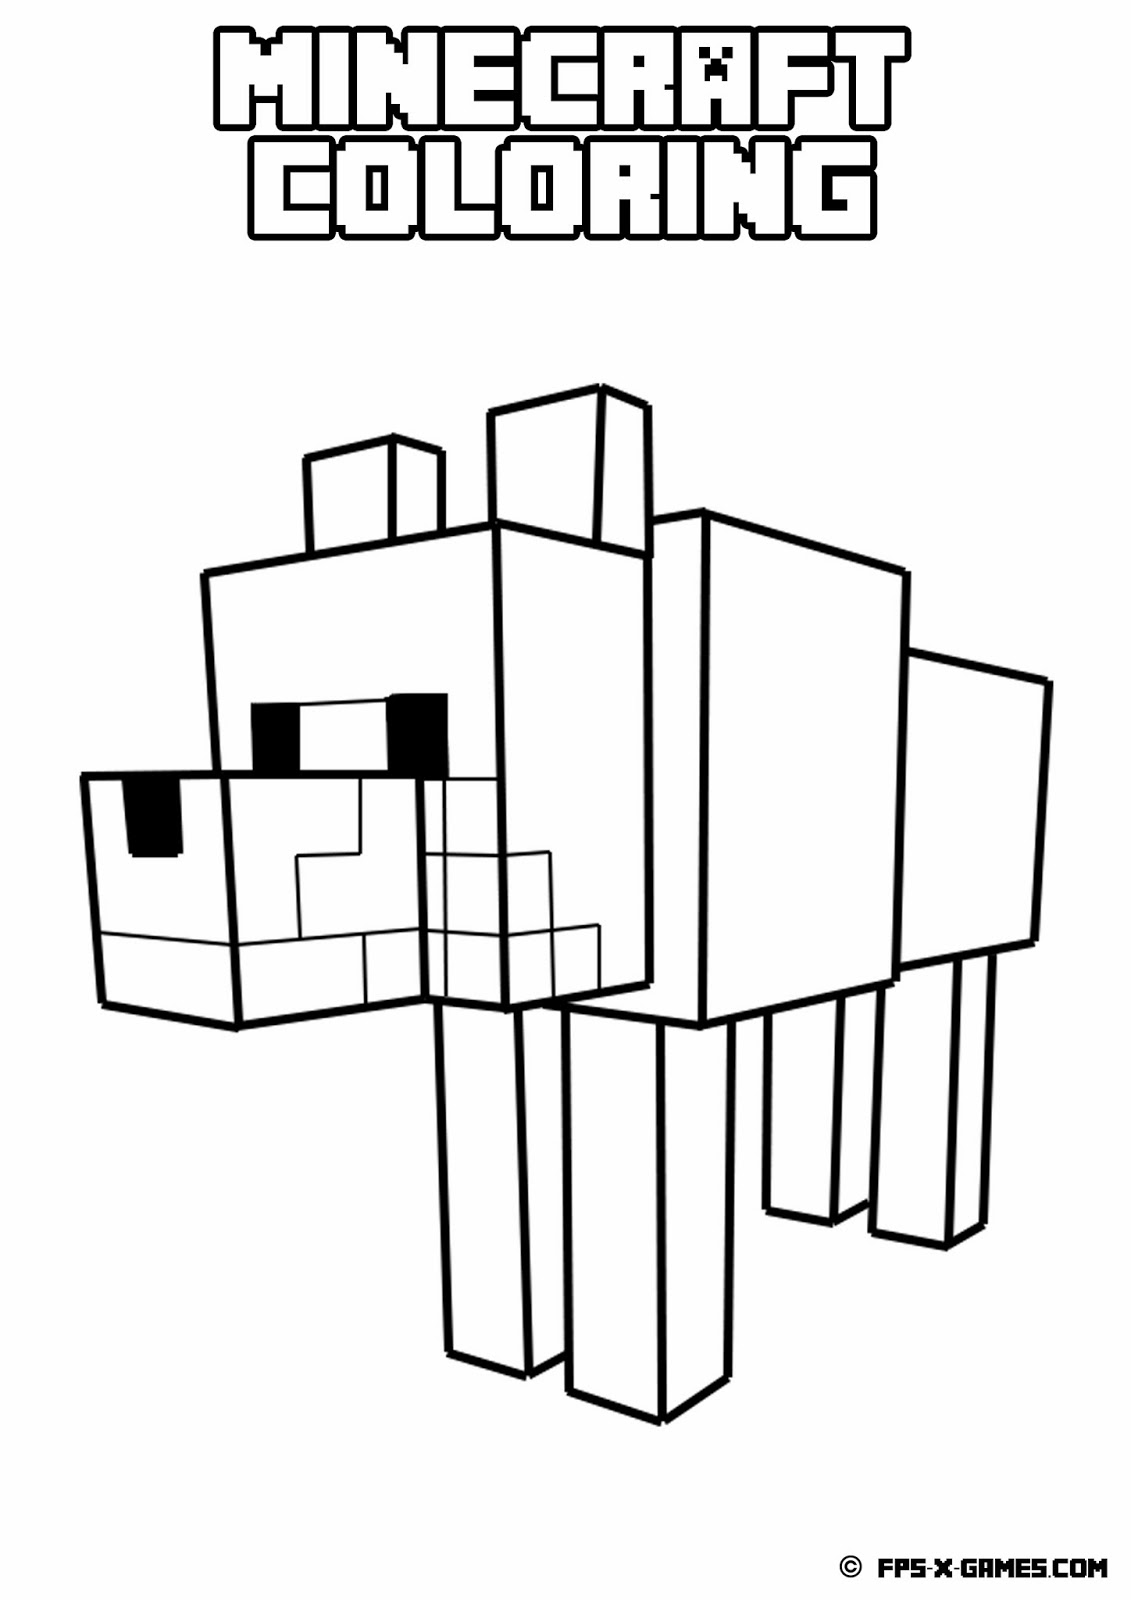 cute easy cute minecraft coloring pages